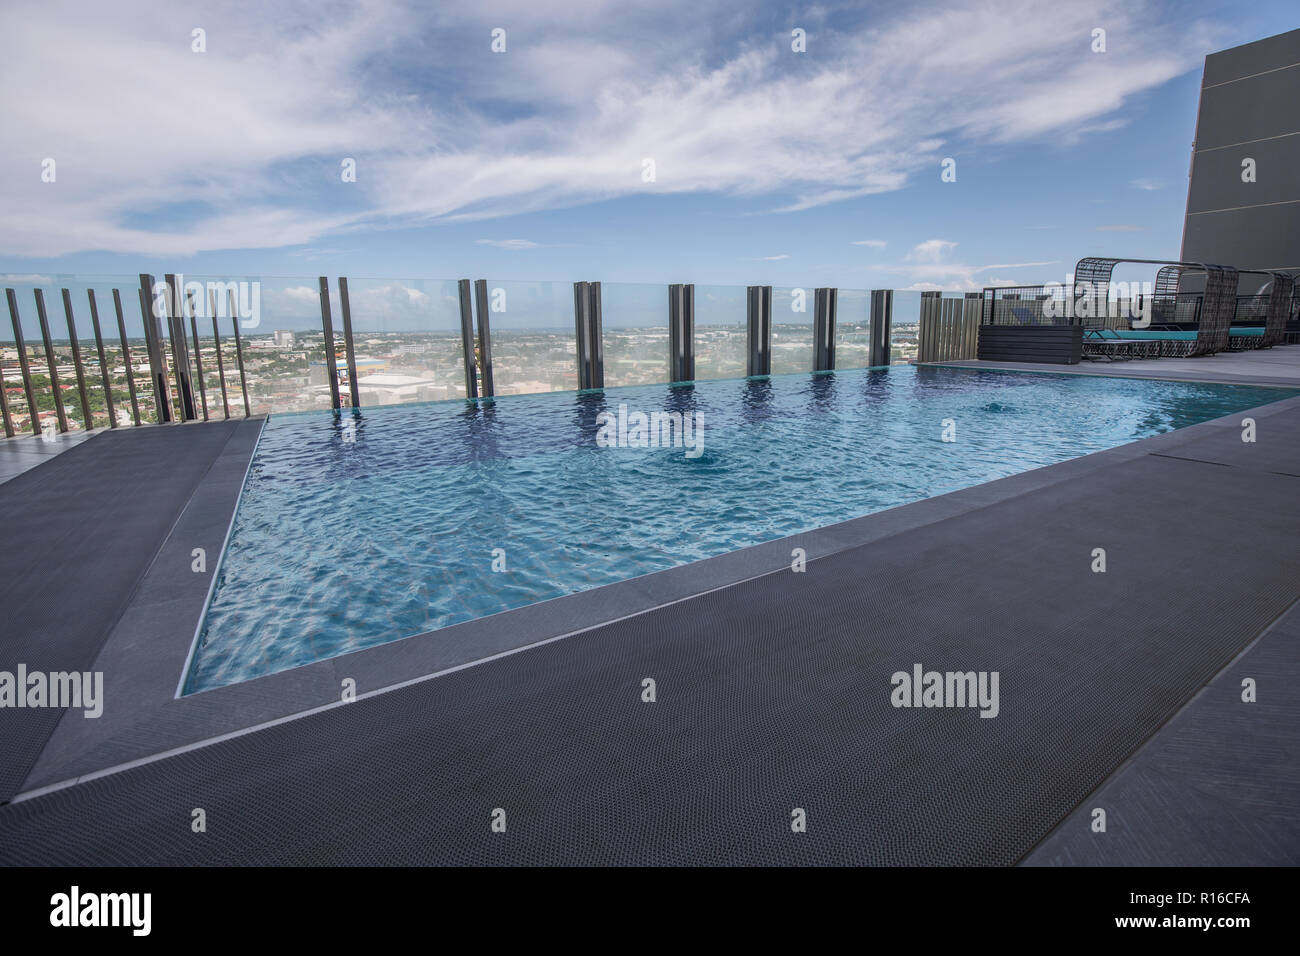 Roof top hotel pool with spa section and a nice view in a relax scenery Stock Photo